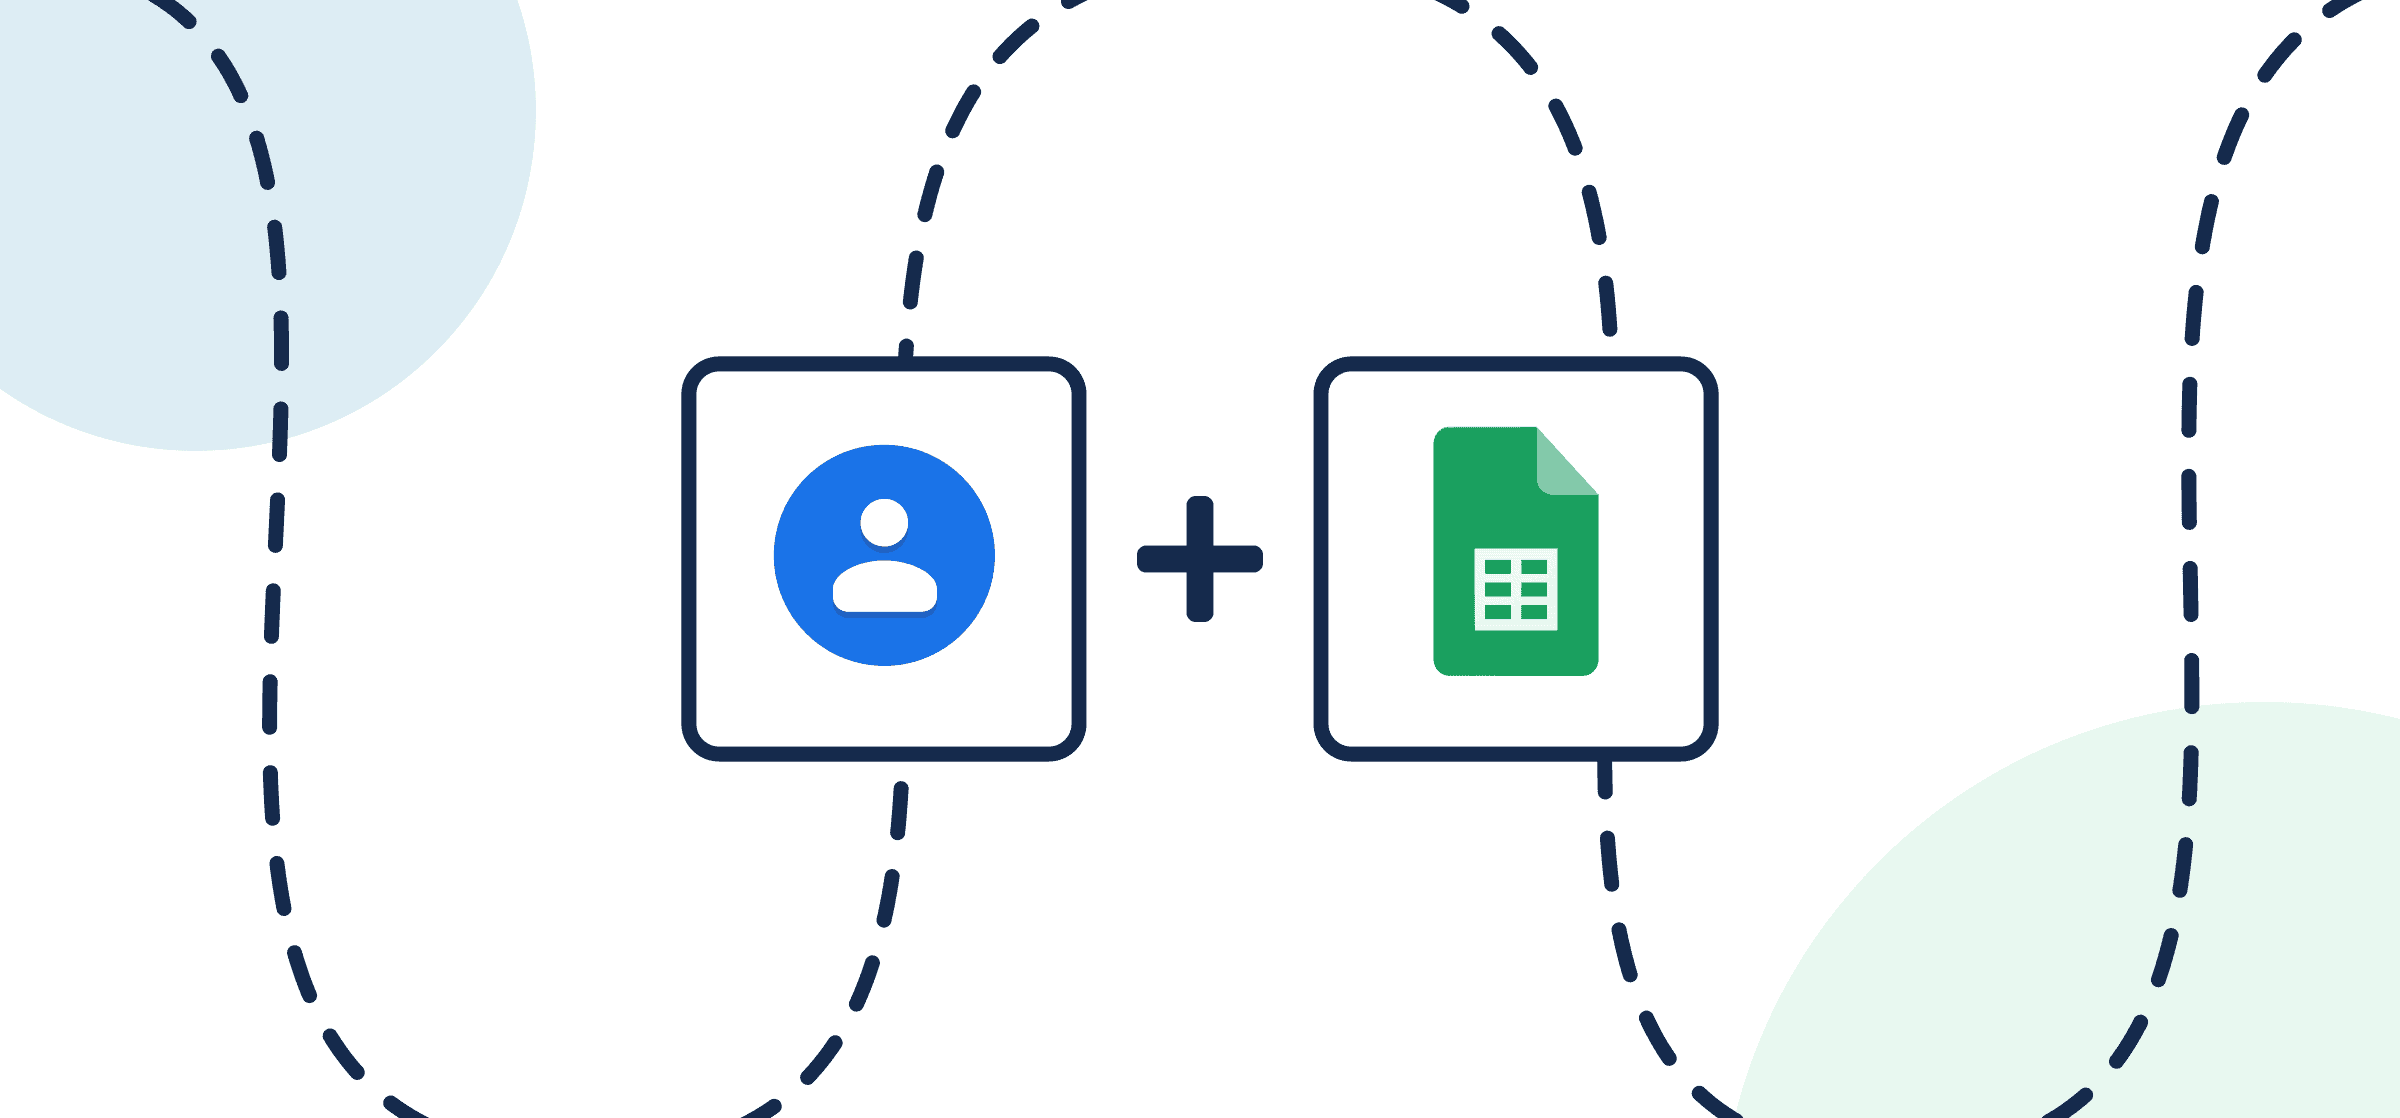 Featured image illustrating a step-by-step guide on syncing Google Contacts to Google Sheets through Unito, depicted by the connected logos through circles and dotted lines.